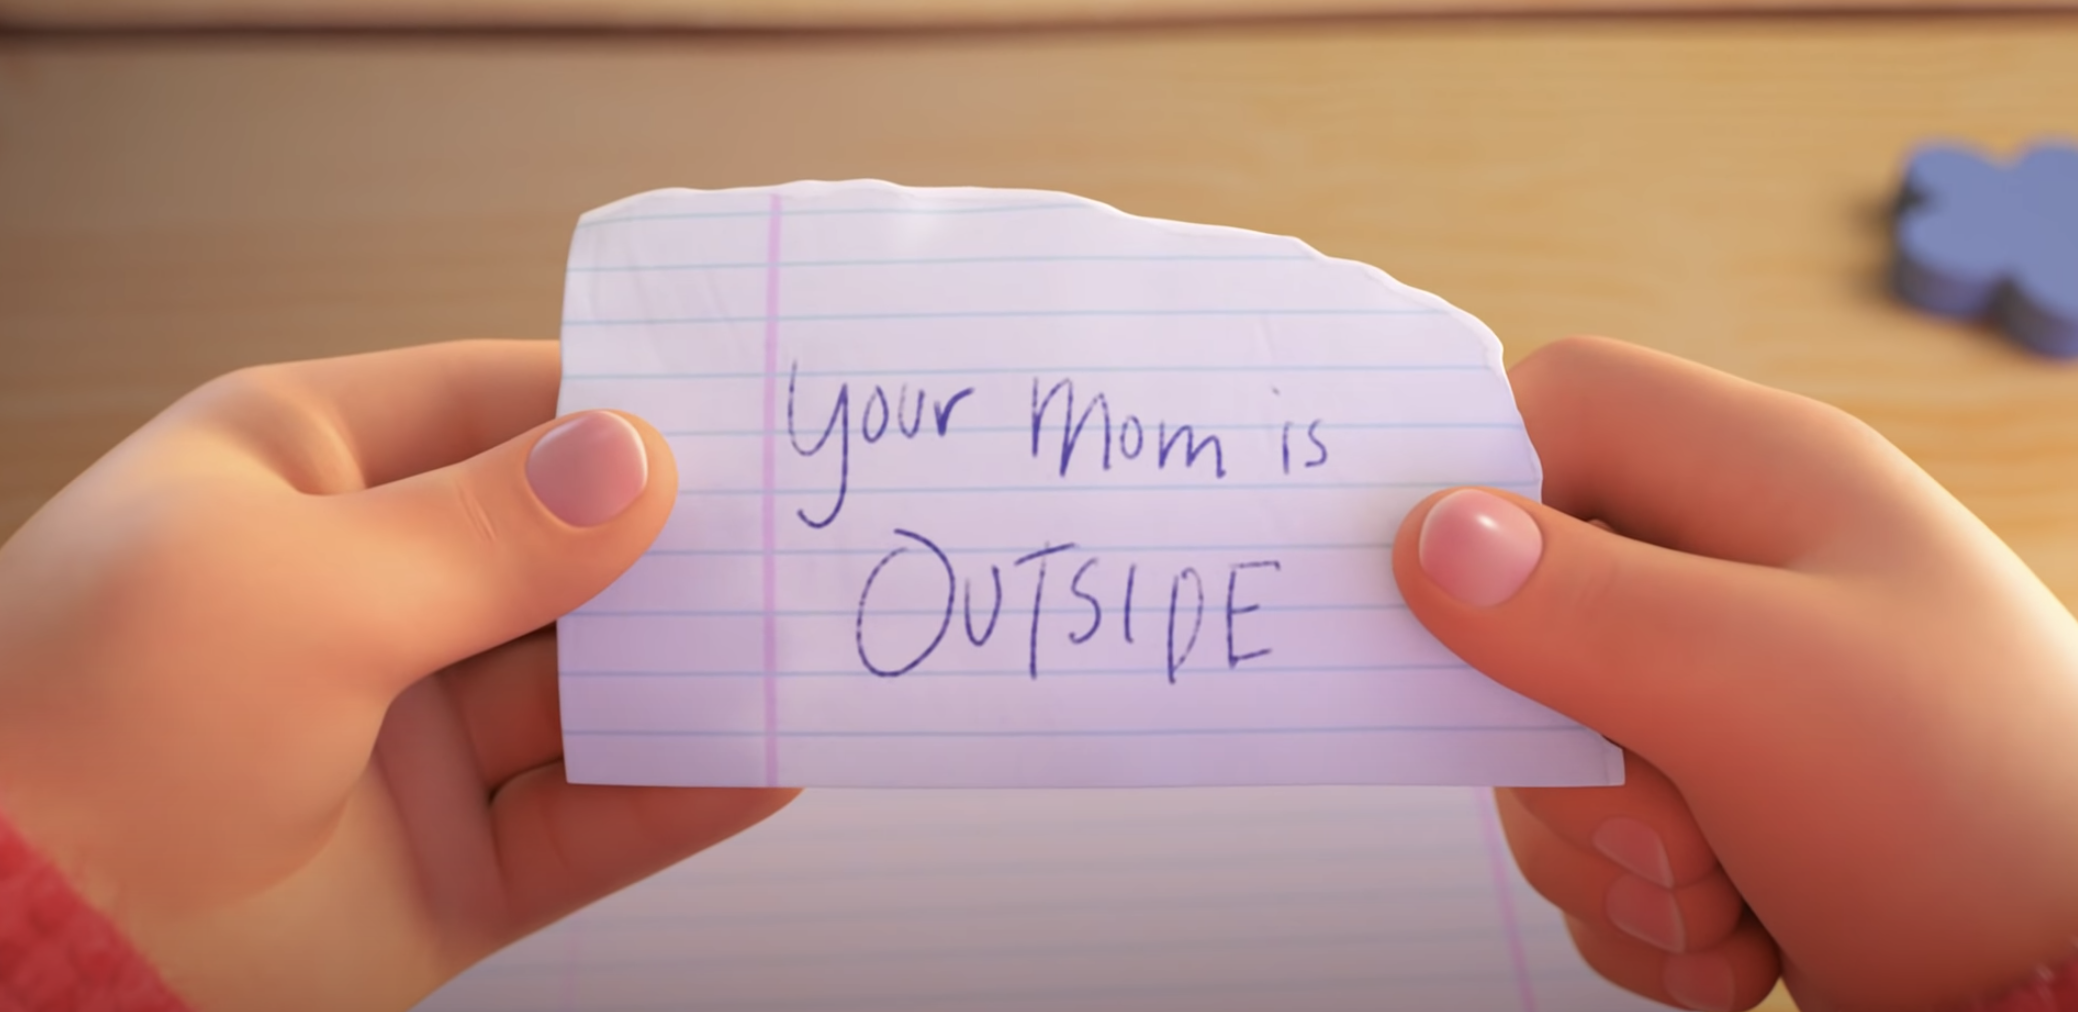 The note says &quot;Your mom is OUTSIDE&quot;